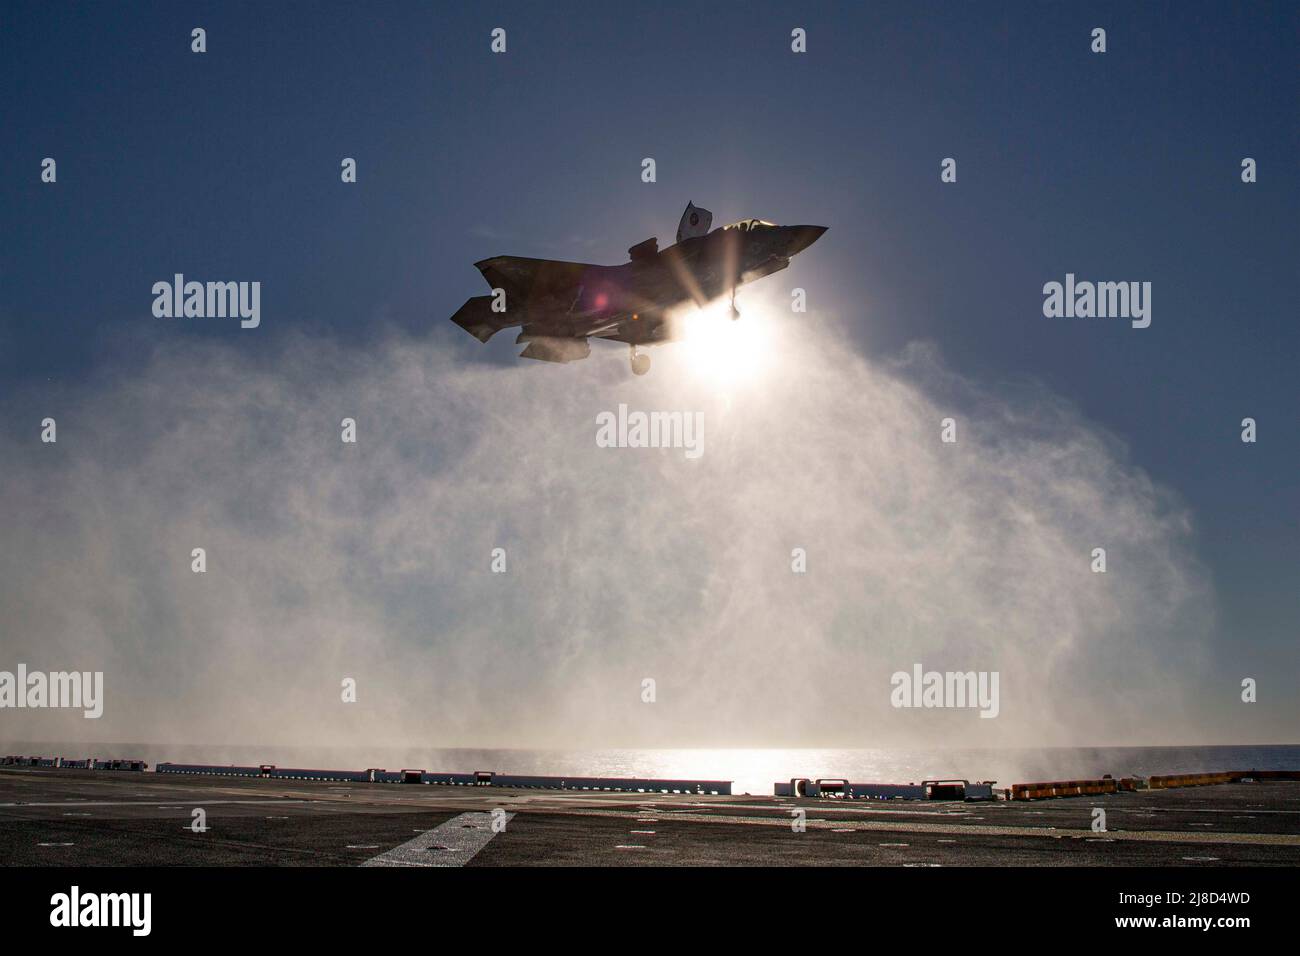 A U.S. Marine Corps F-35B Lightning II fighter aircraft, attached to the Flying Lethernecks of Marine Fighter Attack Squadron 122, performs a vertical landing on the flight deck of the Wasp-class amphibious assault ship USS Makin Island, February 6, 2022 operating on the Pacific Ocean. Stock Photo